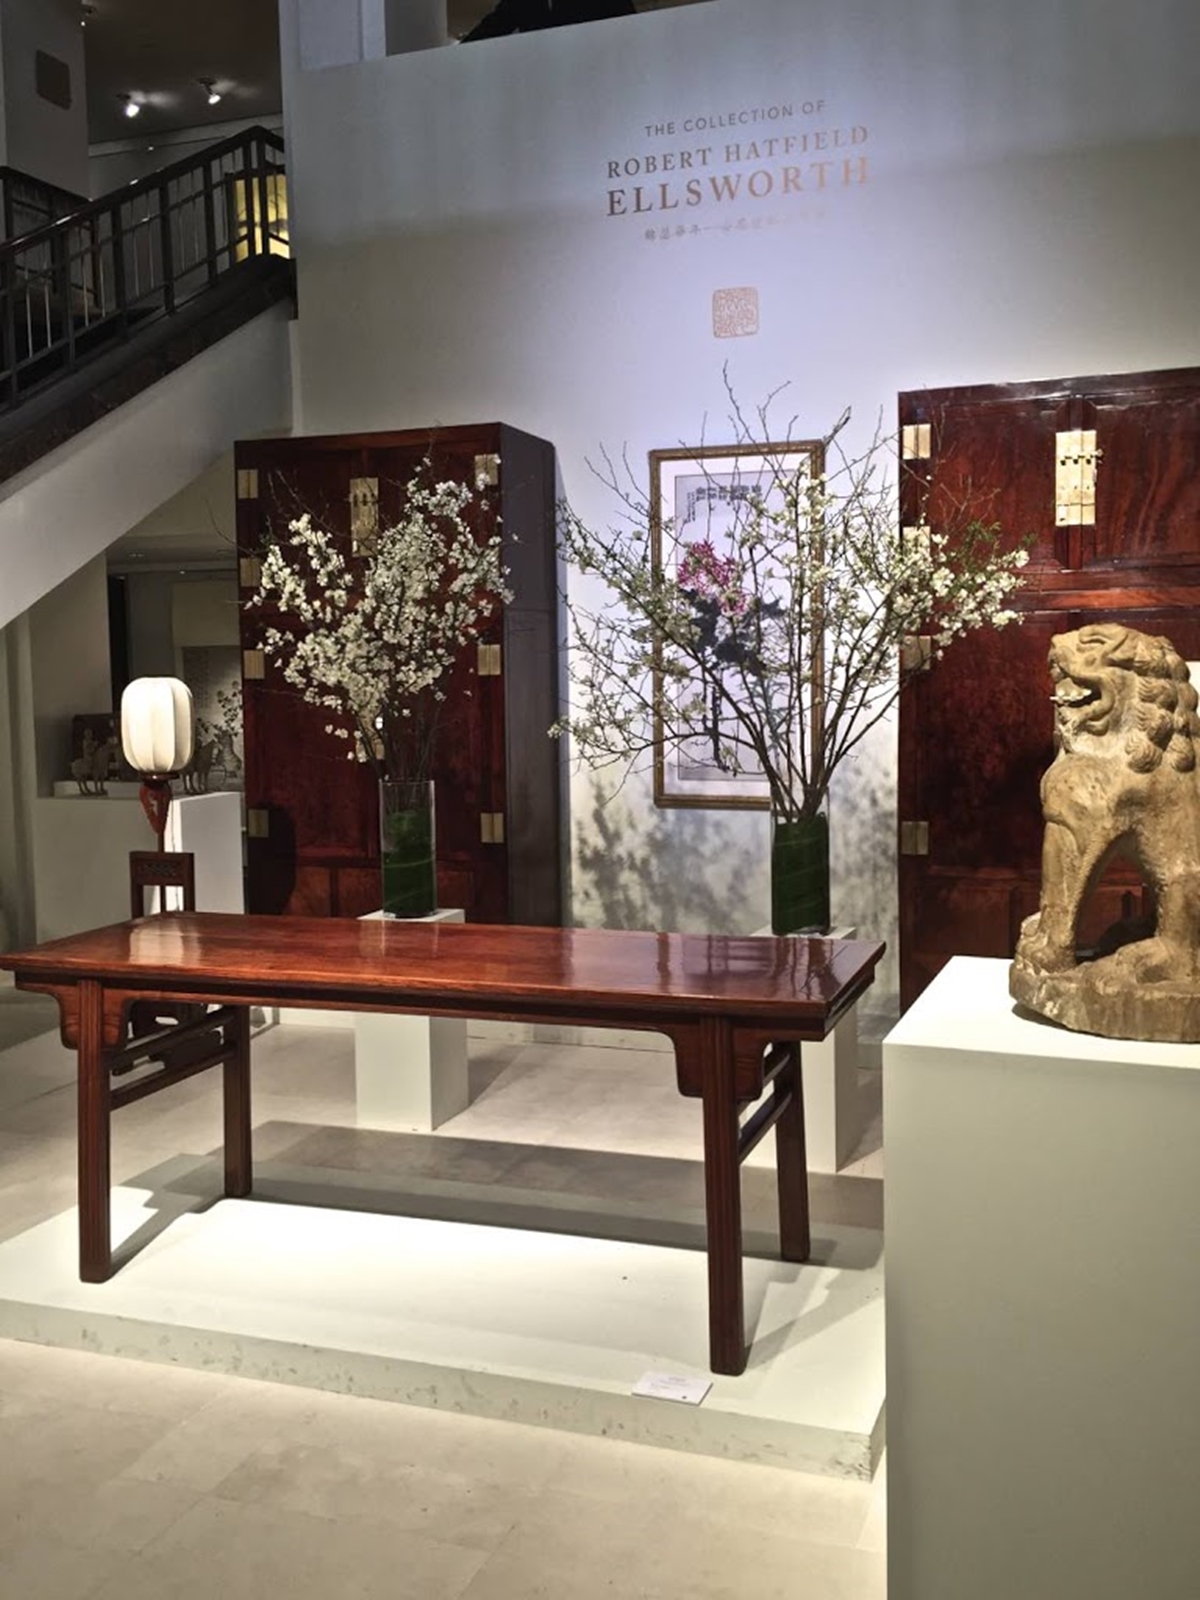 the collection of robert hatfield ellsworth | christie’s new york | 17-21 march 2015 photo credit lisa walsh | innerspace